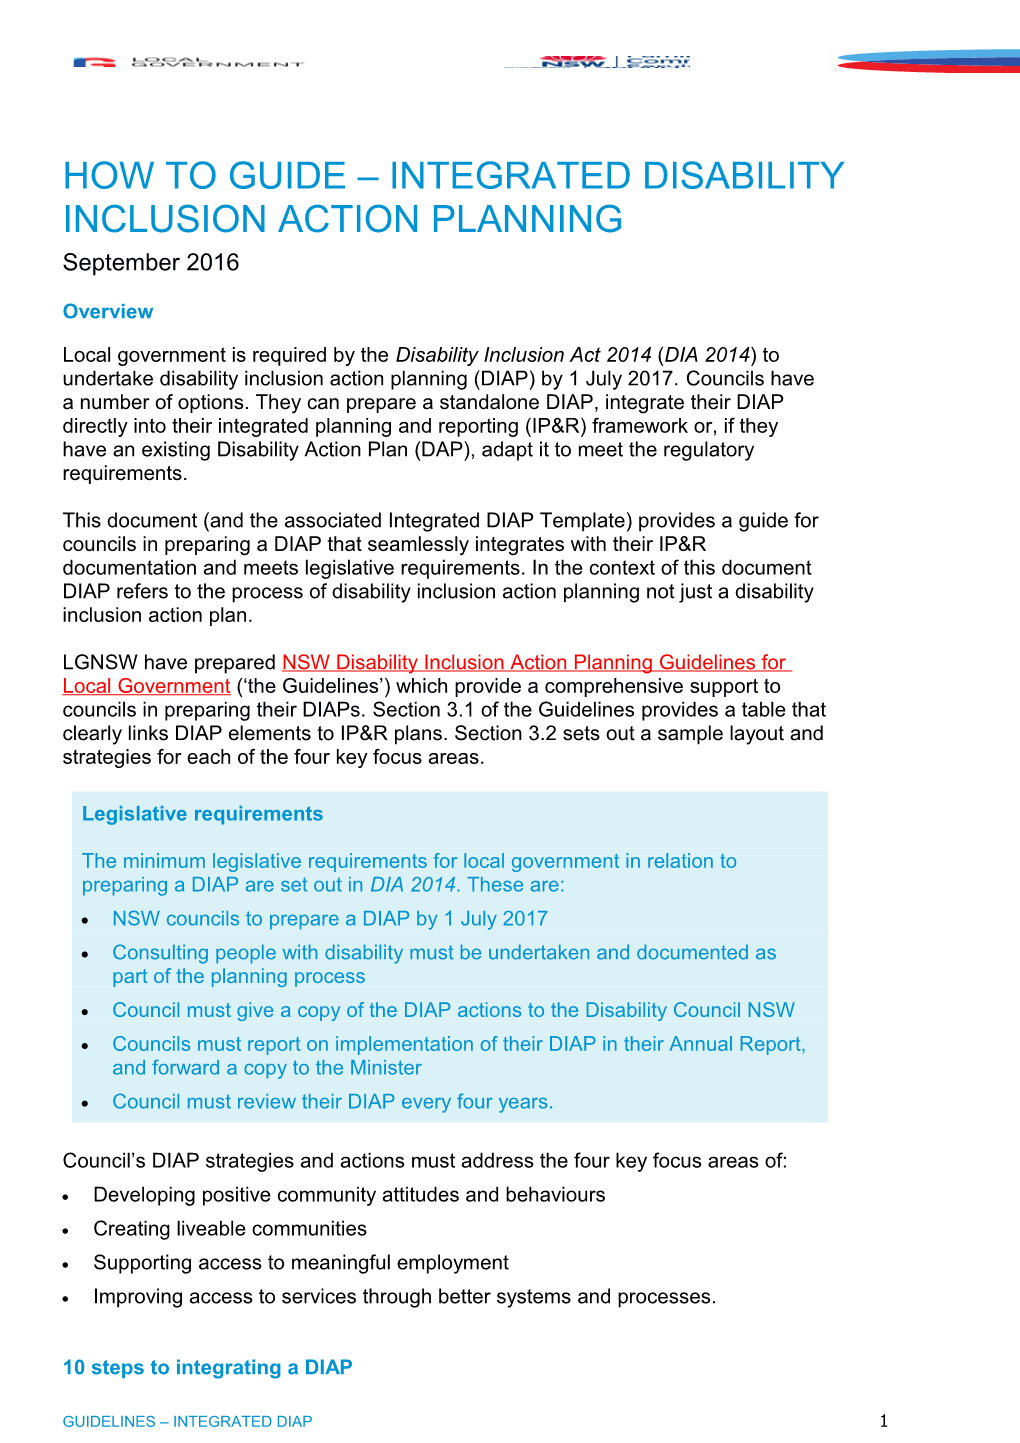 How to Guide Integrated Disability Inclusion Action Planning